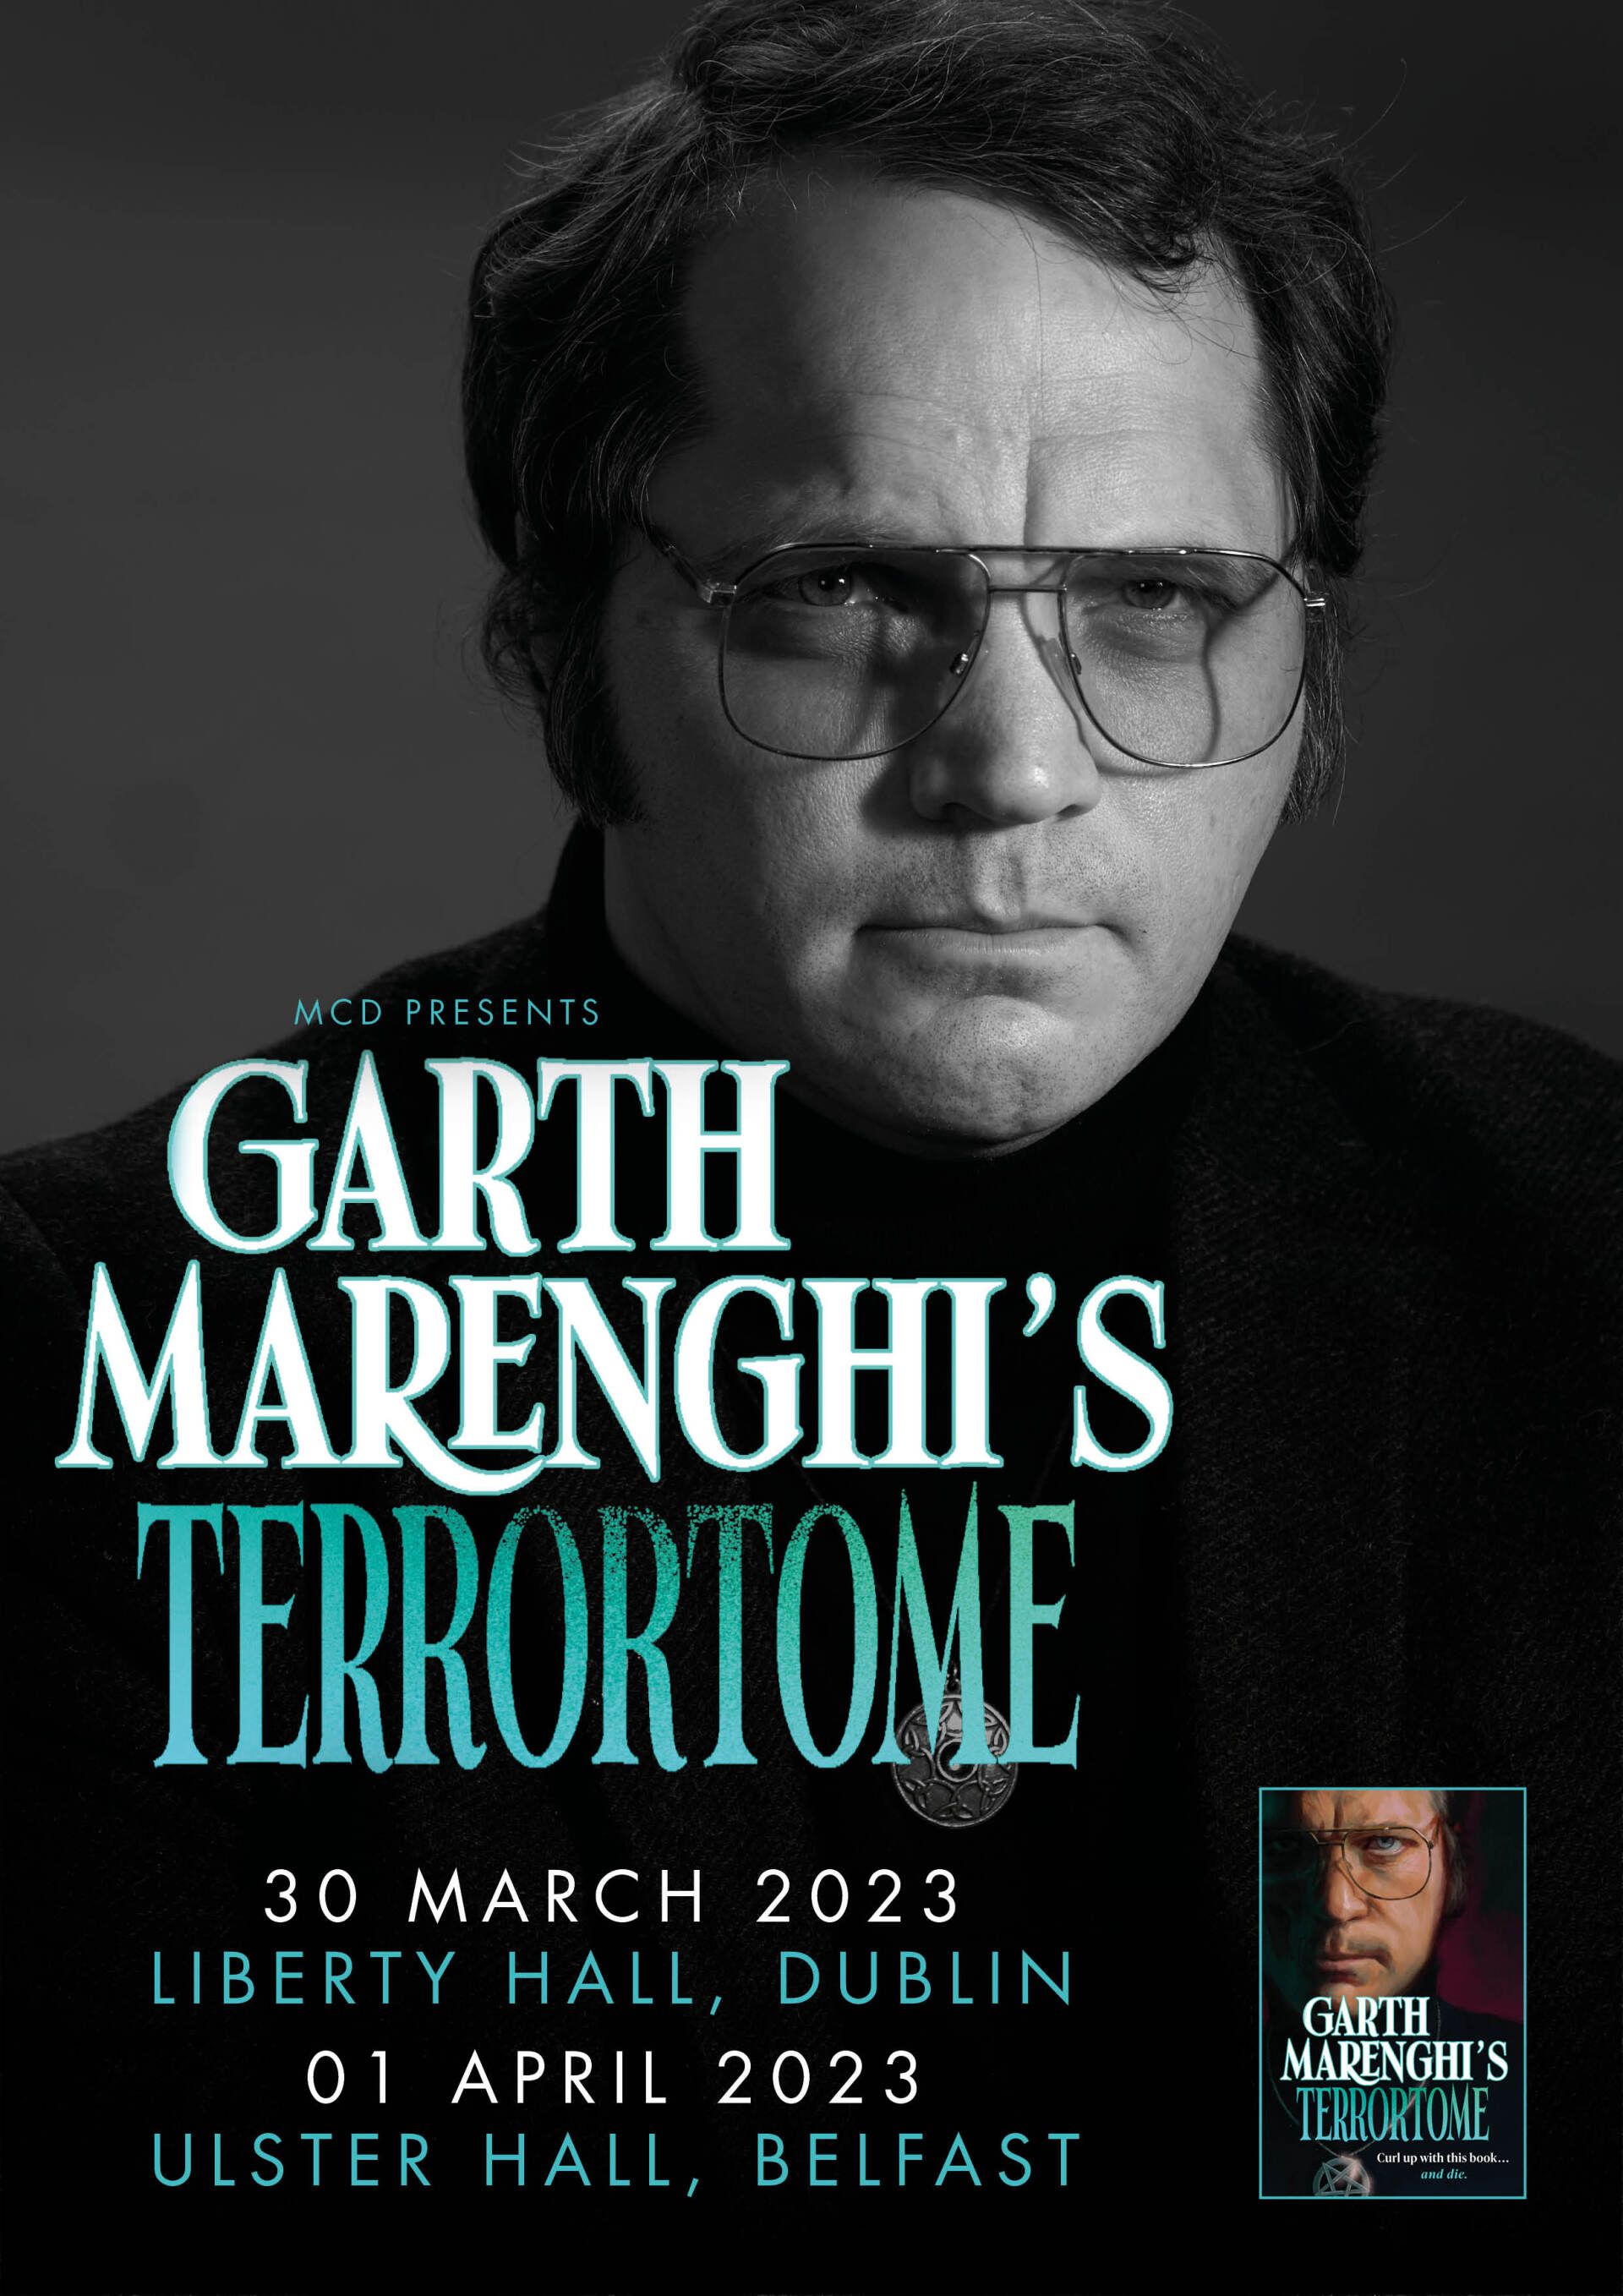 AN EVENING OF TERRORTOME WITH GARTH MARENGHI  Garth Marenghi’s TerrorTome - Book Tour  With Matthew Holness